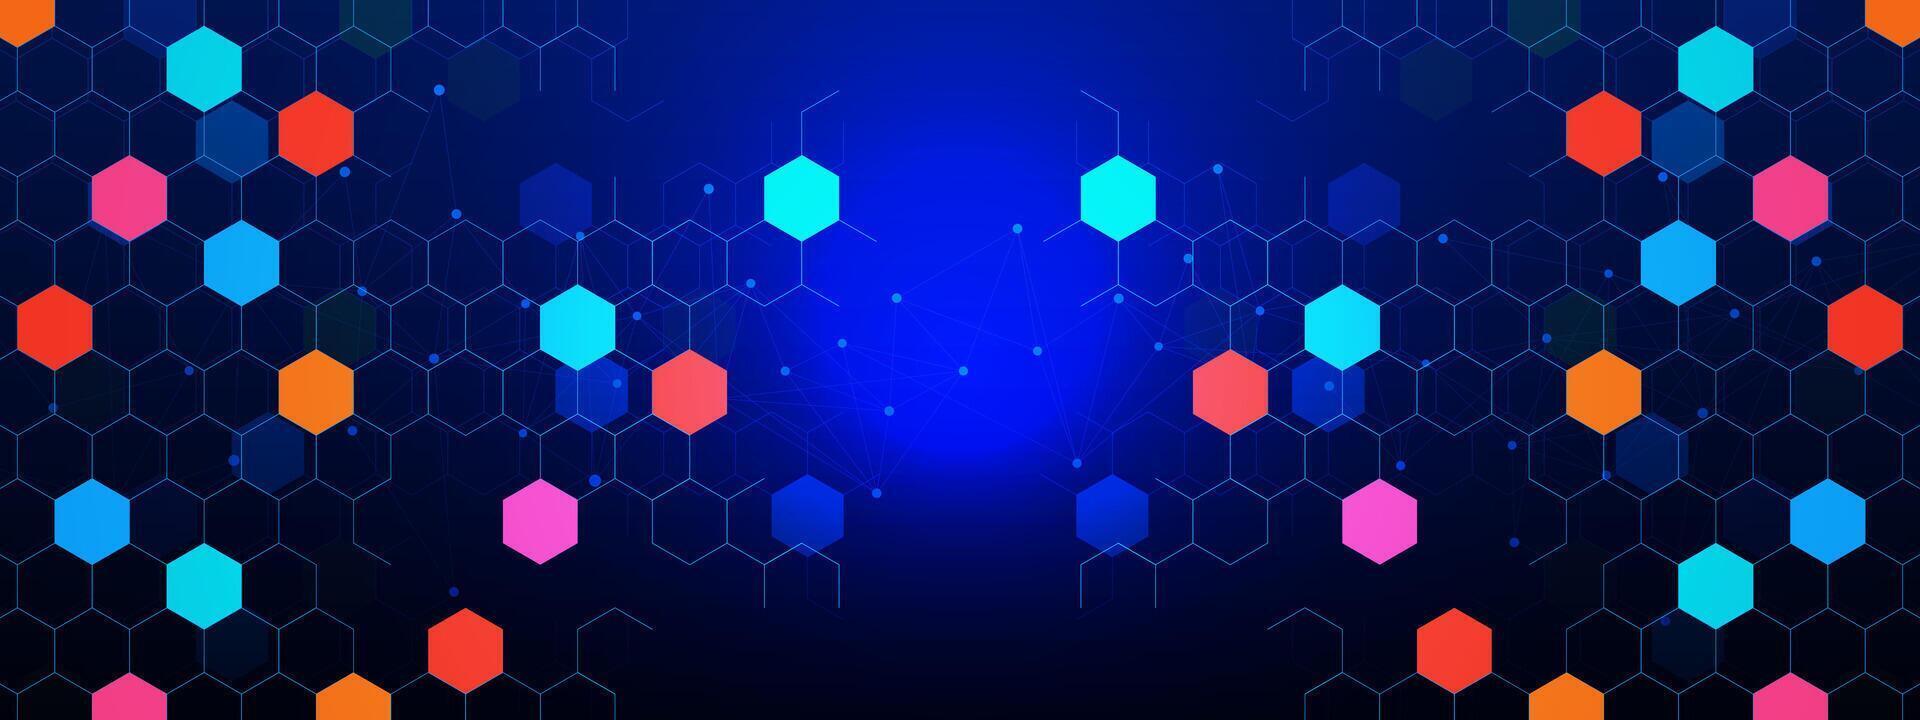 Abstract geometric with colorful hexagons pattern and connecting the dots lines on dark blue background. Medical, science and technology concept design. Vector illustration.